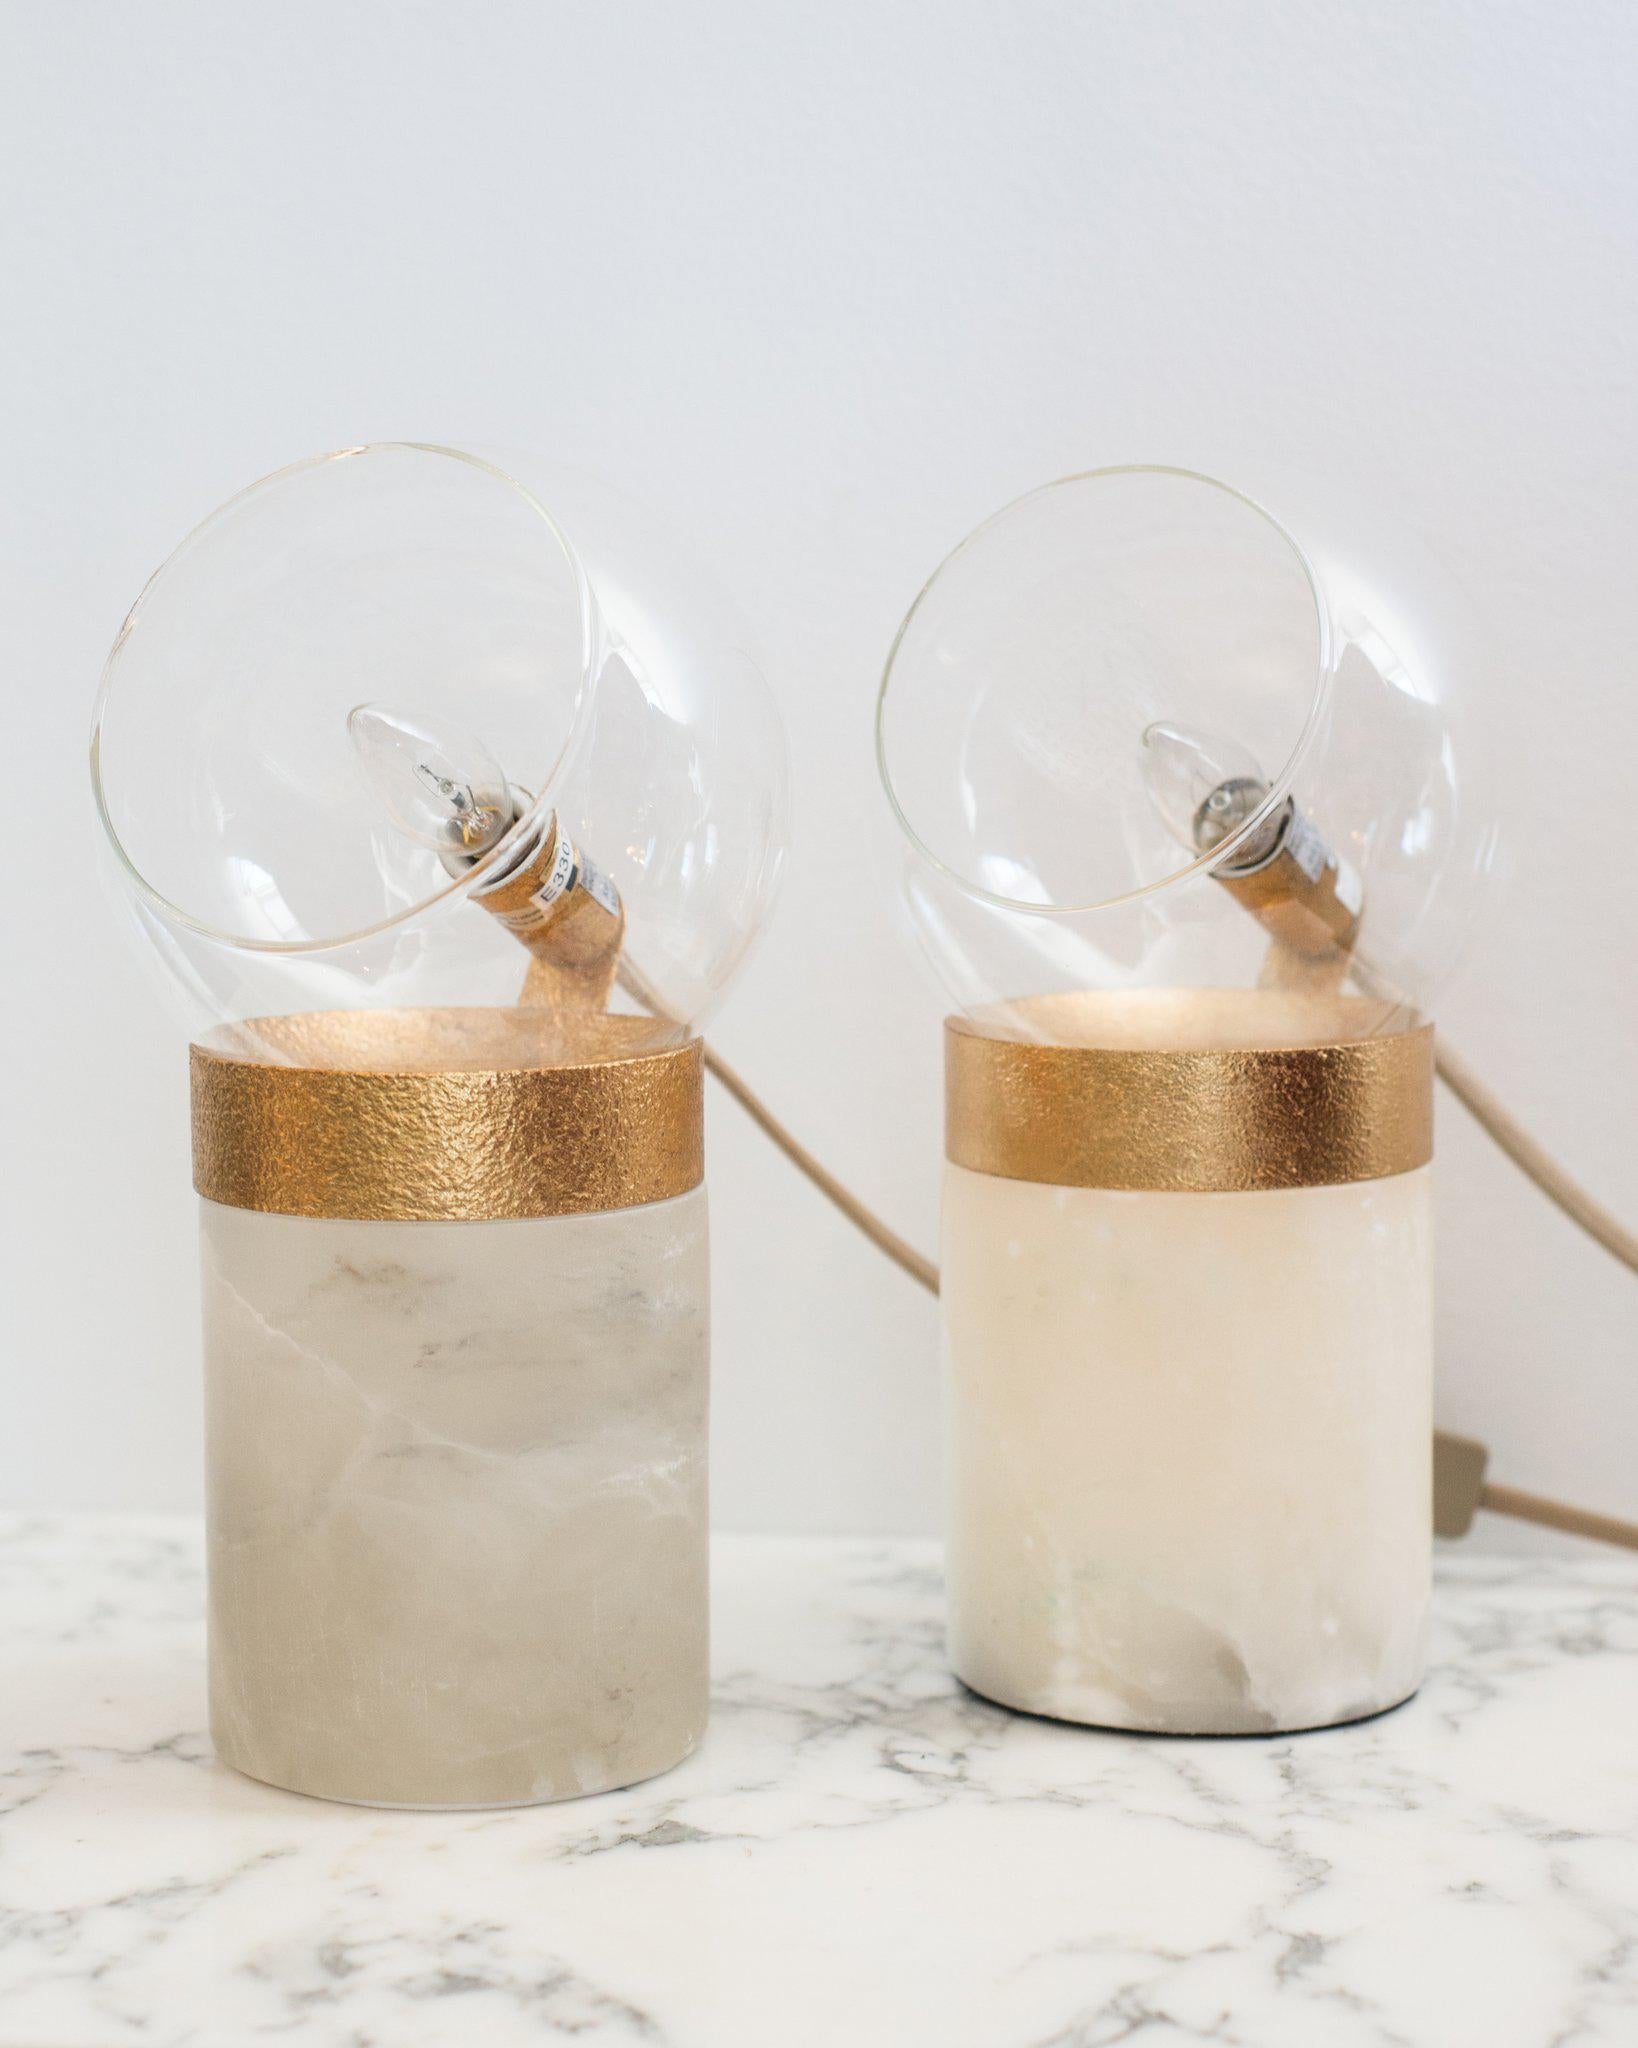 A pair of small lamps on solid quartz bases with glass domes and brass details. Suitable for a desk, night stands or end tables, these lamps are most beautiful when used with Edison bulbs. When lit, the translucent quartz is partially illuminated,